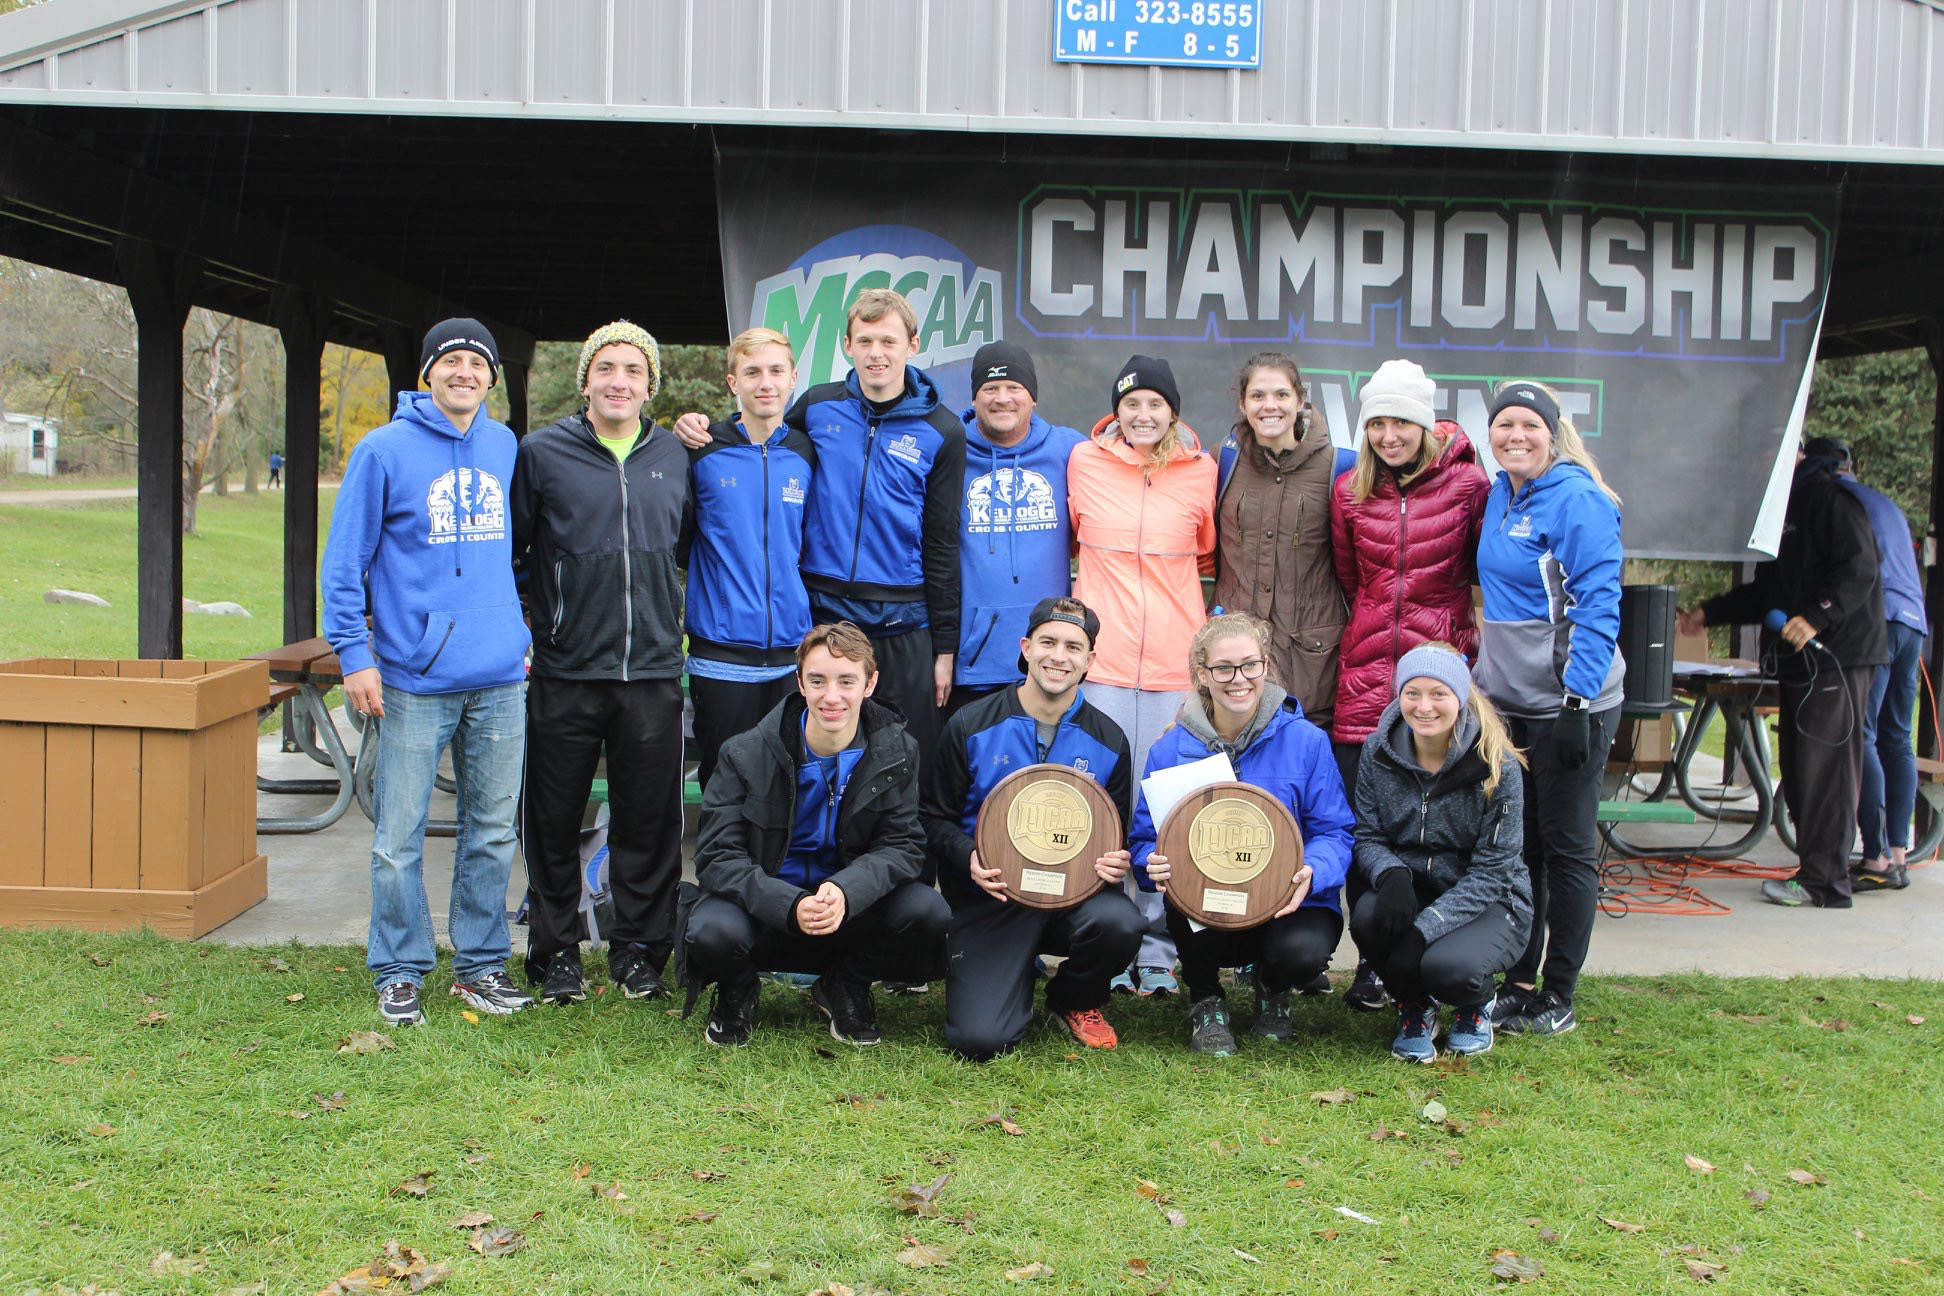 KCC's men's and women's cross-country teams pose with trophies won for winning their respective regional championships.